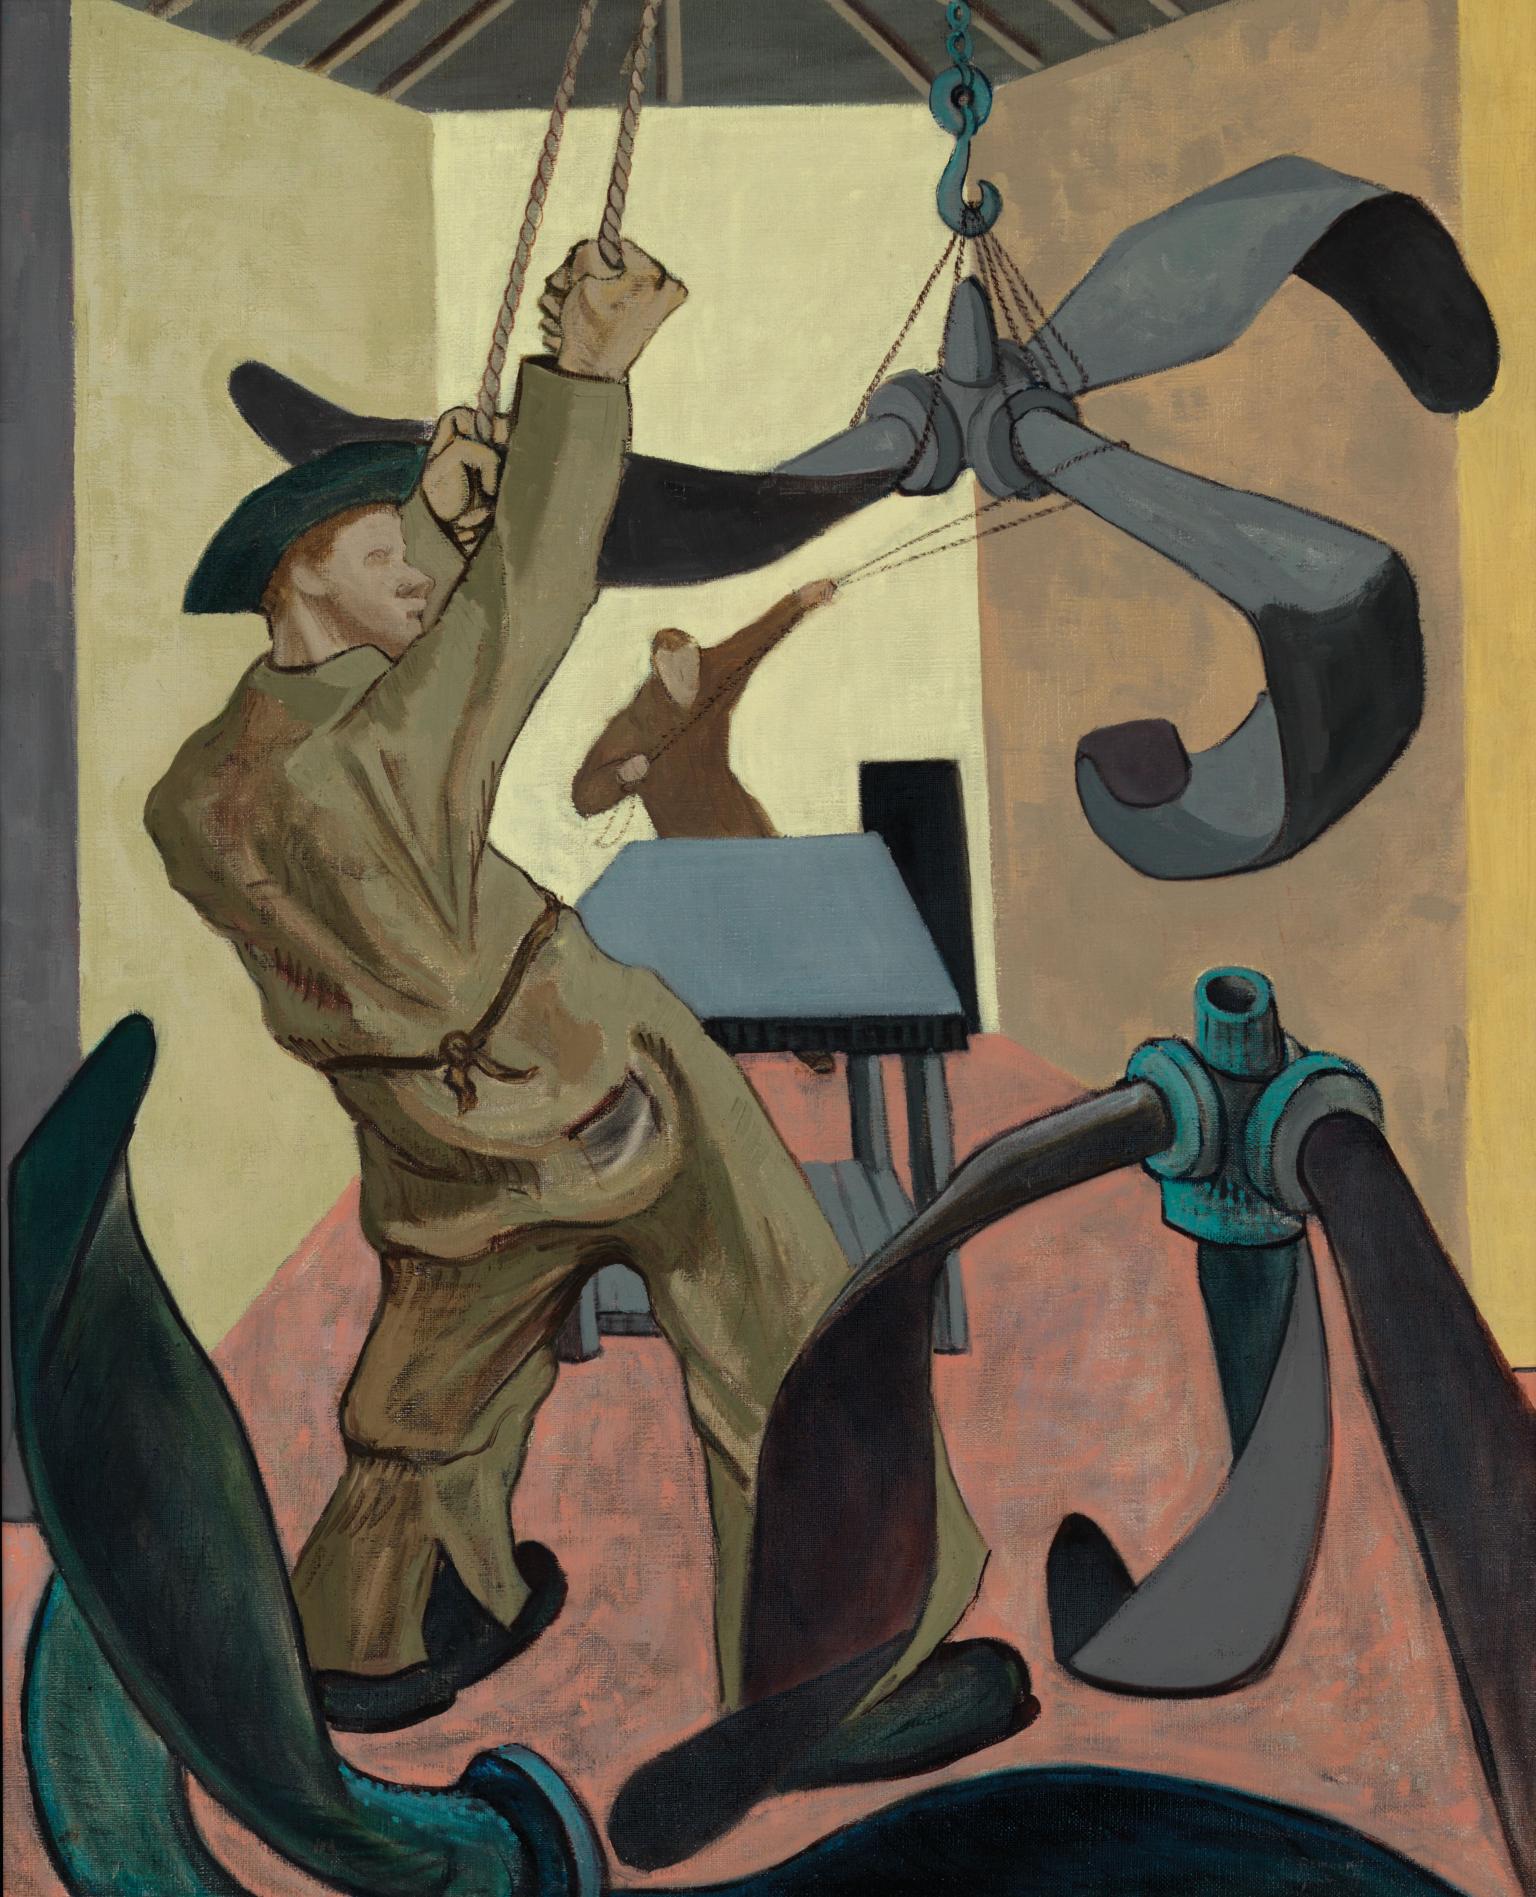 Painting of a man in uniform pulling on ropes to lift a propeller, surrounded by other propellers, as another man performs the same action in the background. 